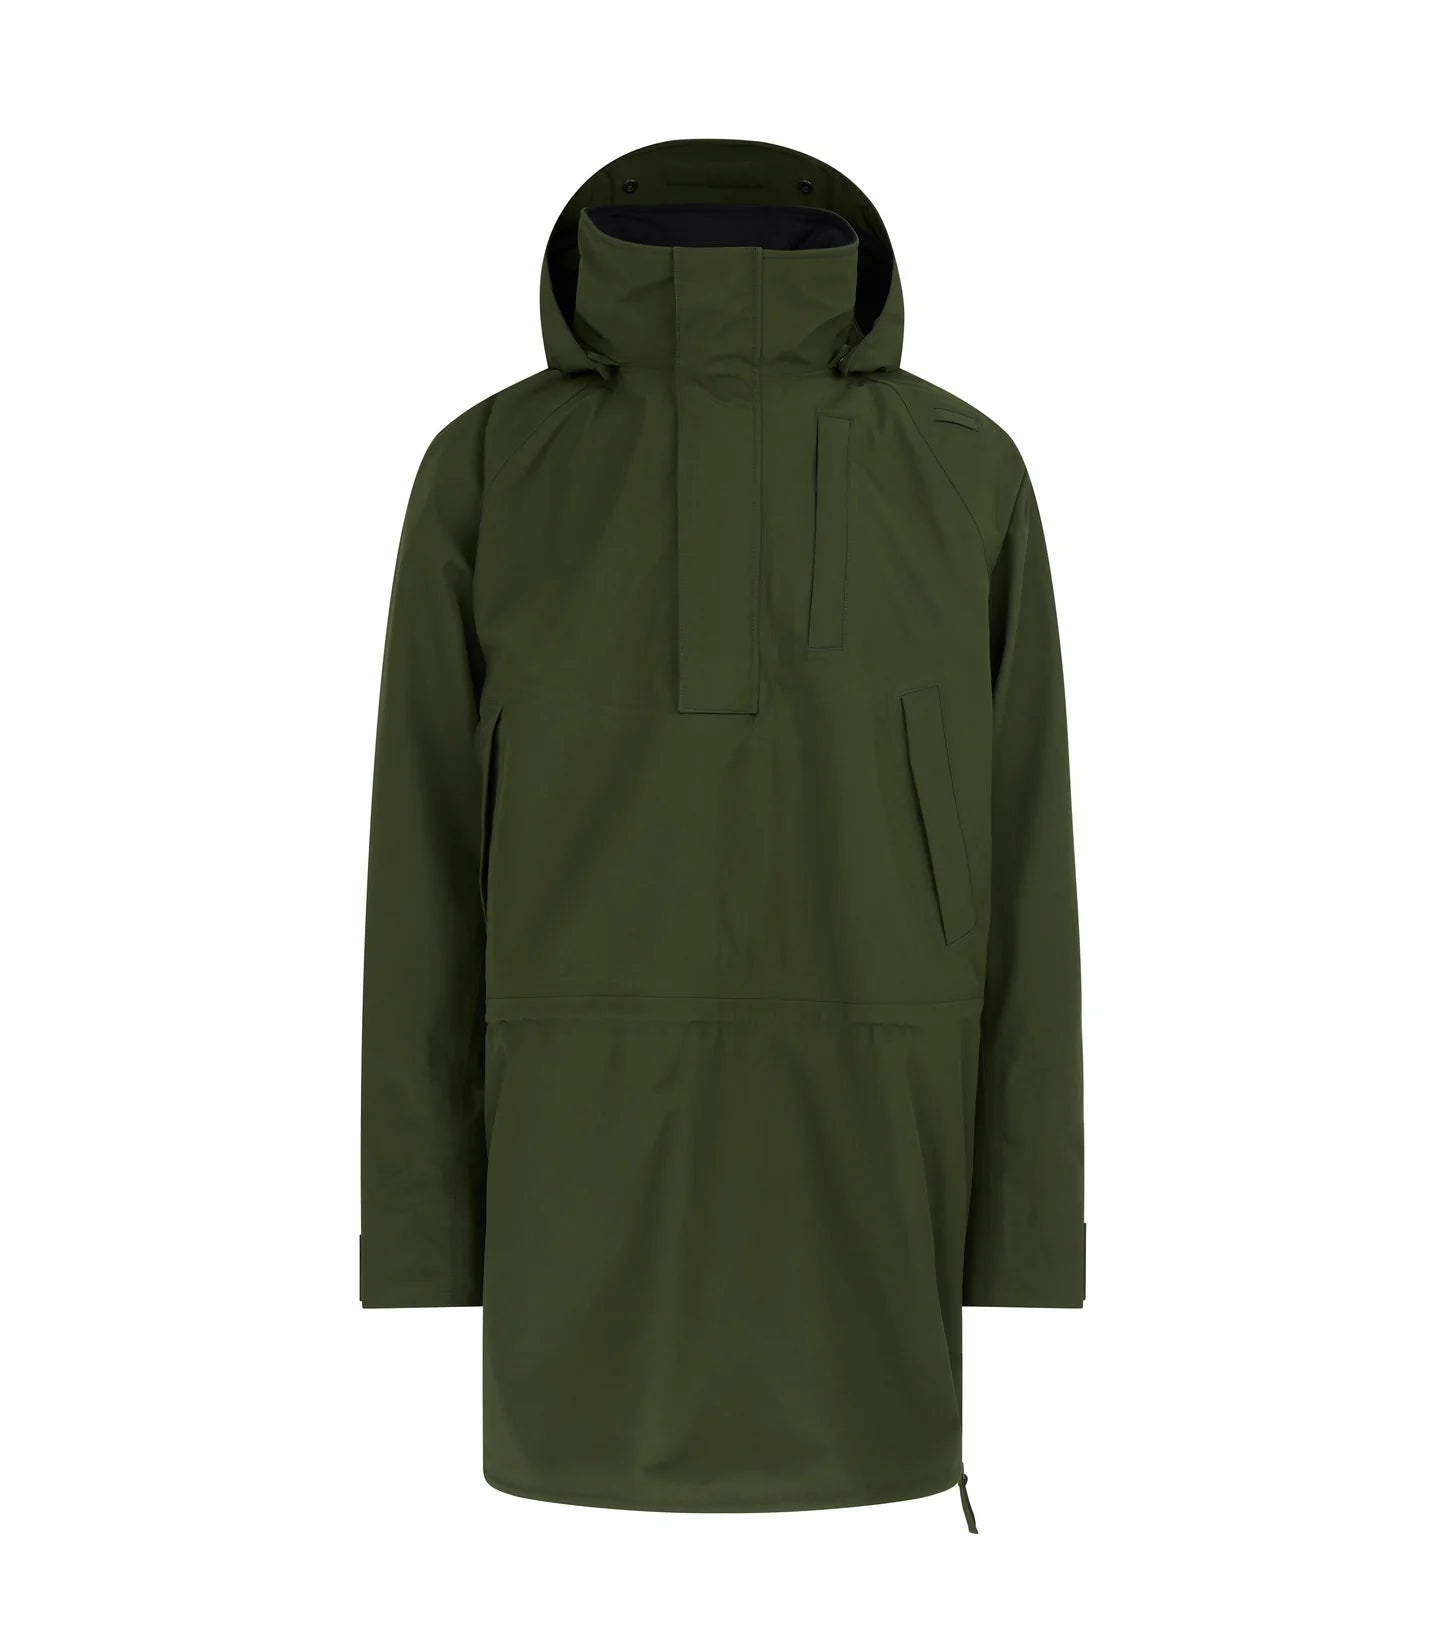 Unisex Technical Atholl Smock In Rifle Green – Purdey at The Royal ...